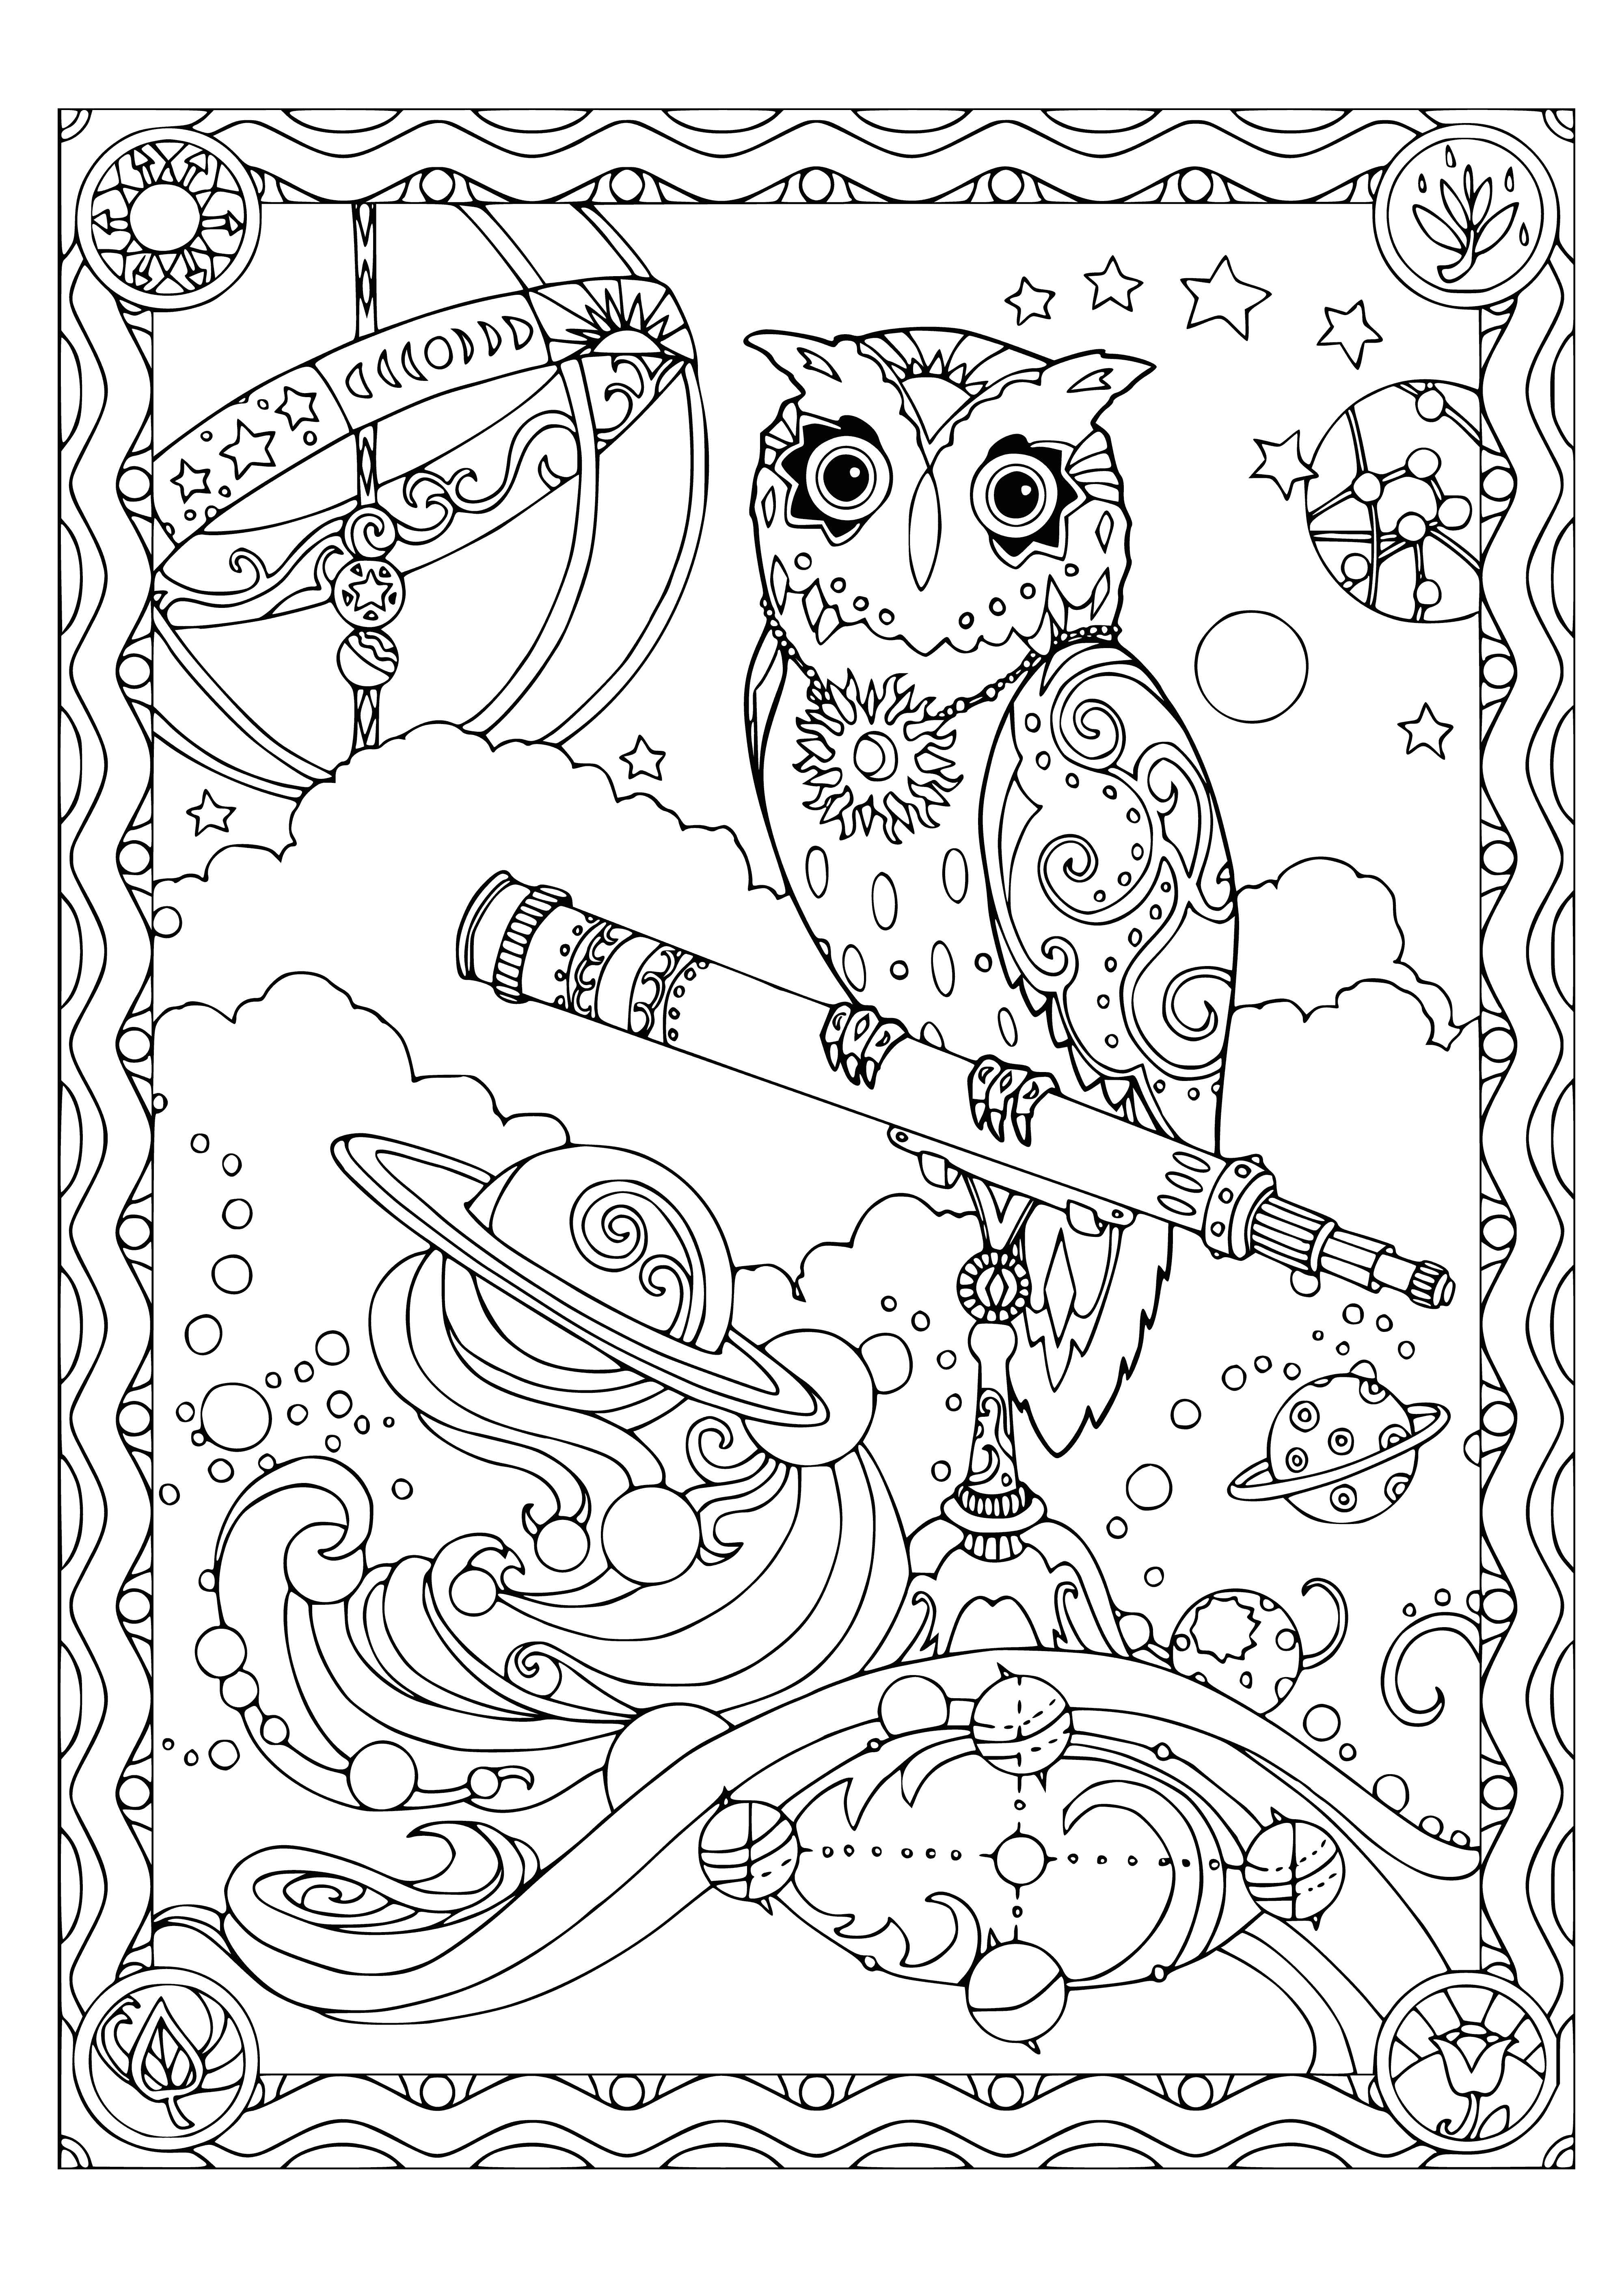 coloring page: Owl looks up at stars through telescope in night sky filled with stars. Owl has calm expression.